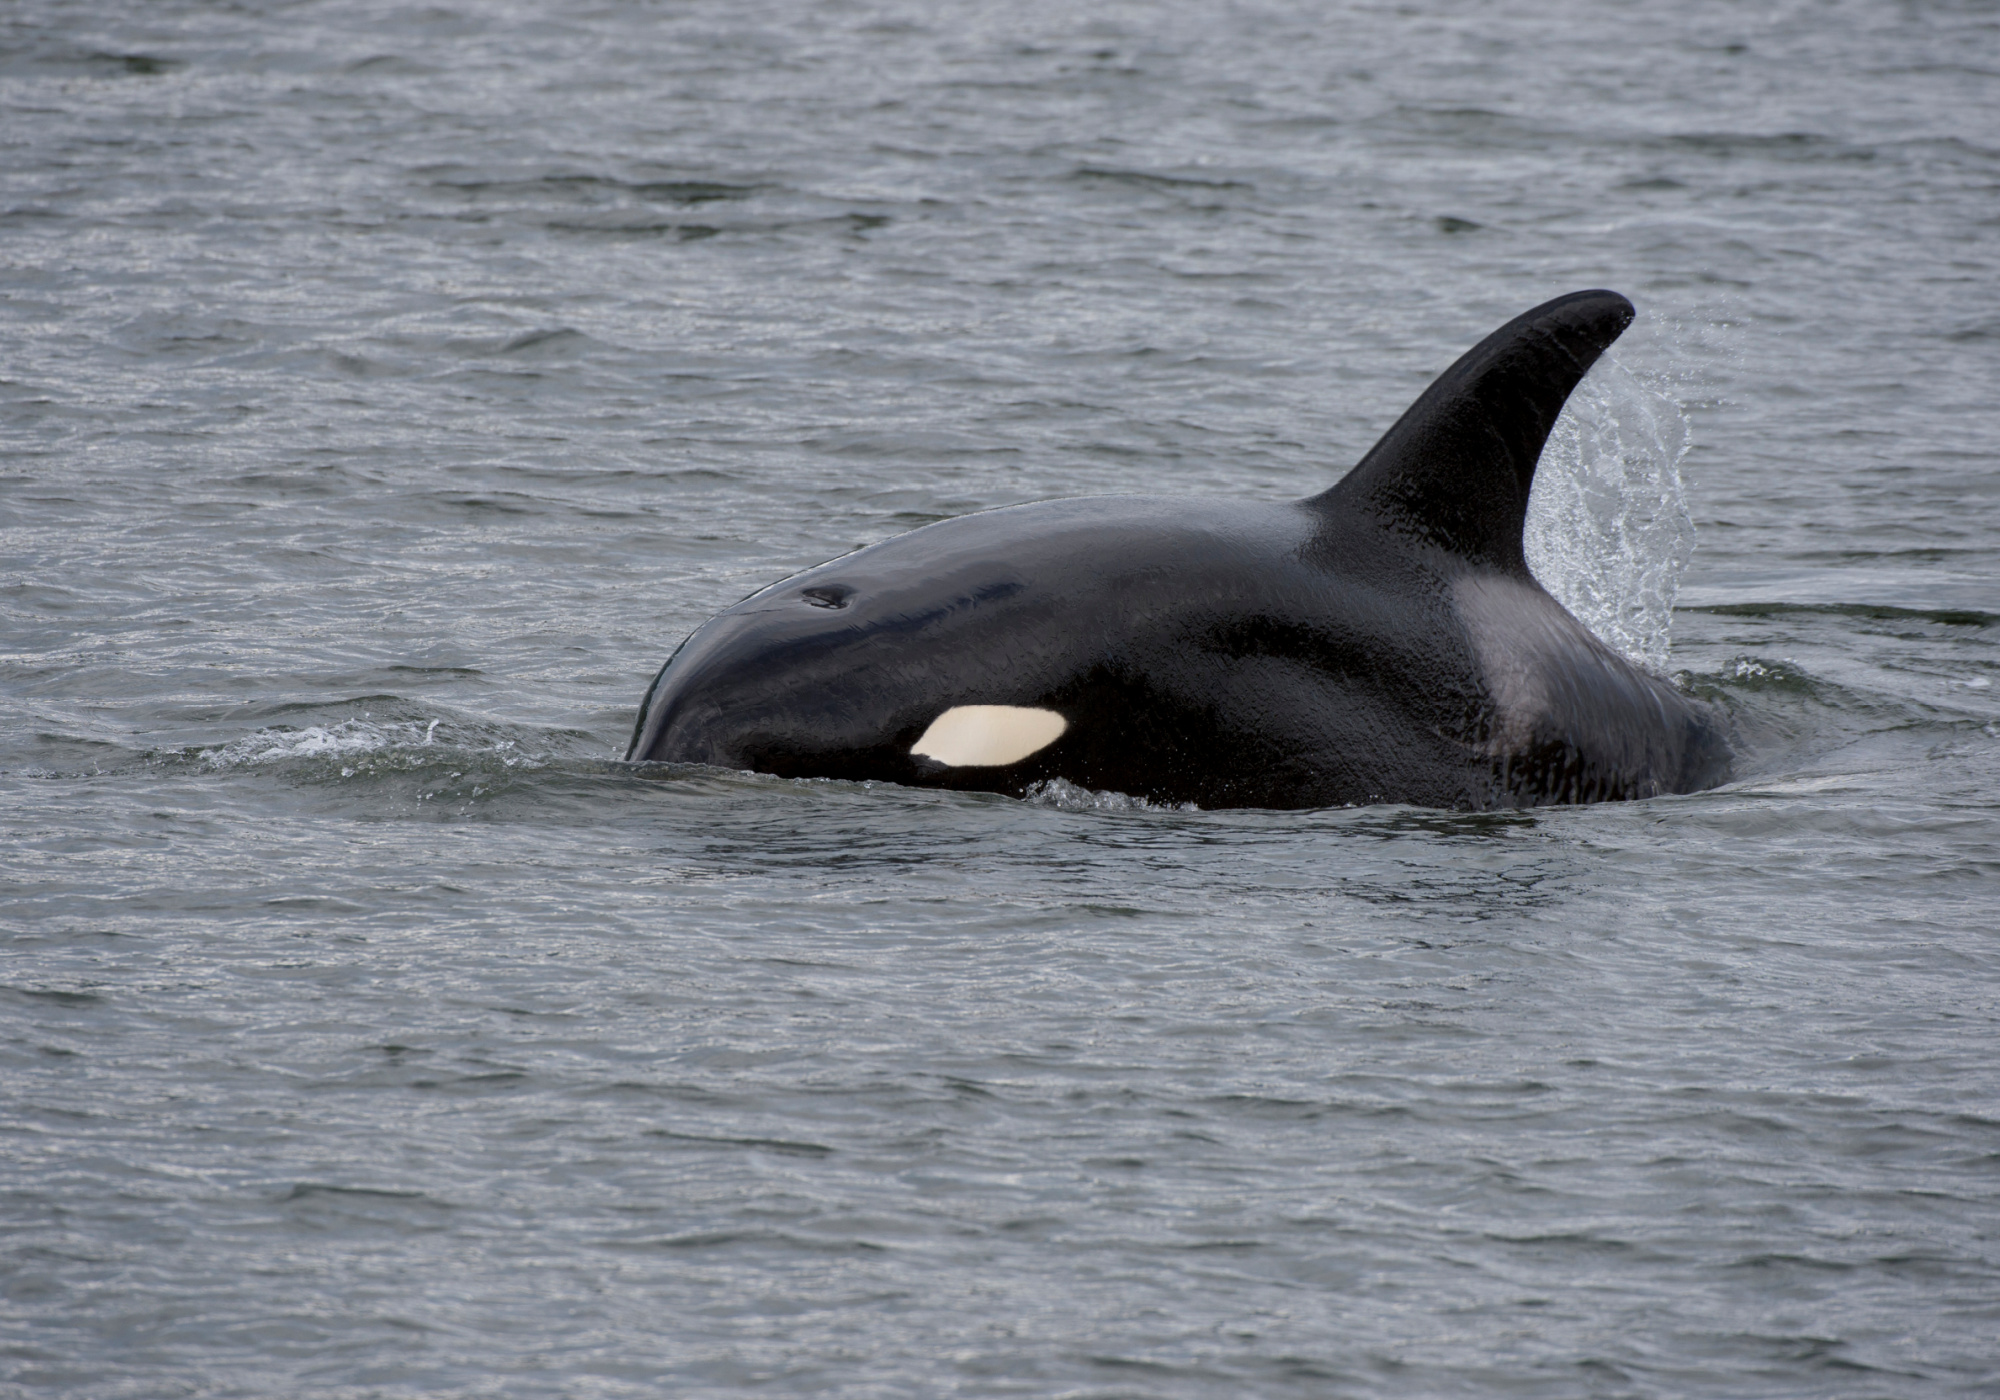 Orcas were discovered hunting great white sharks in may.